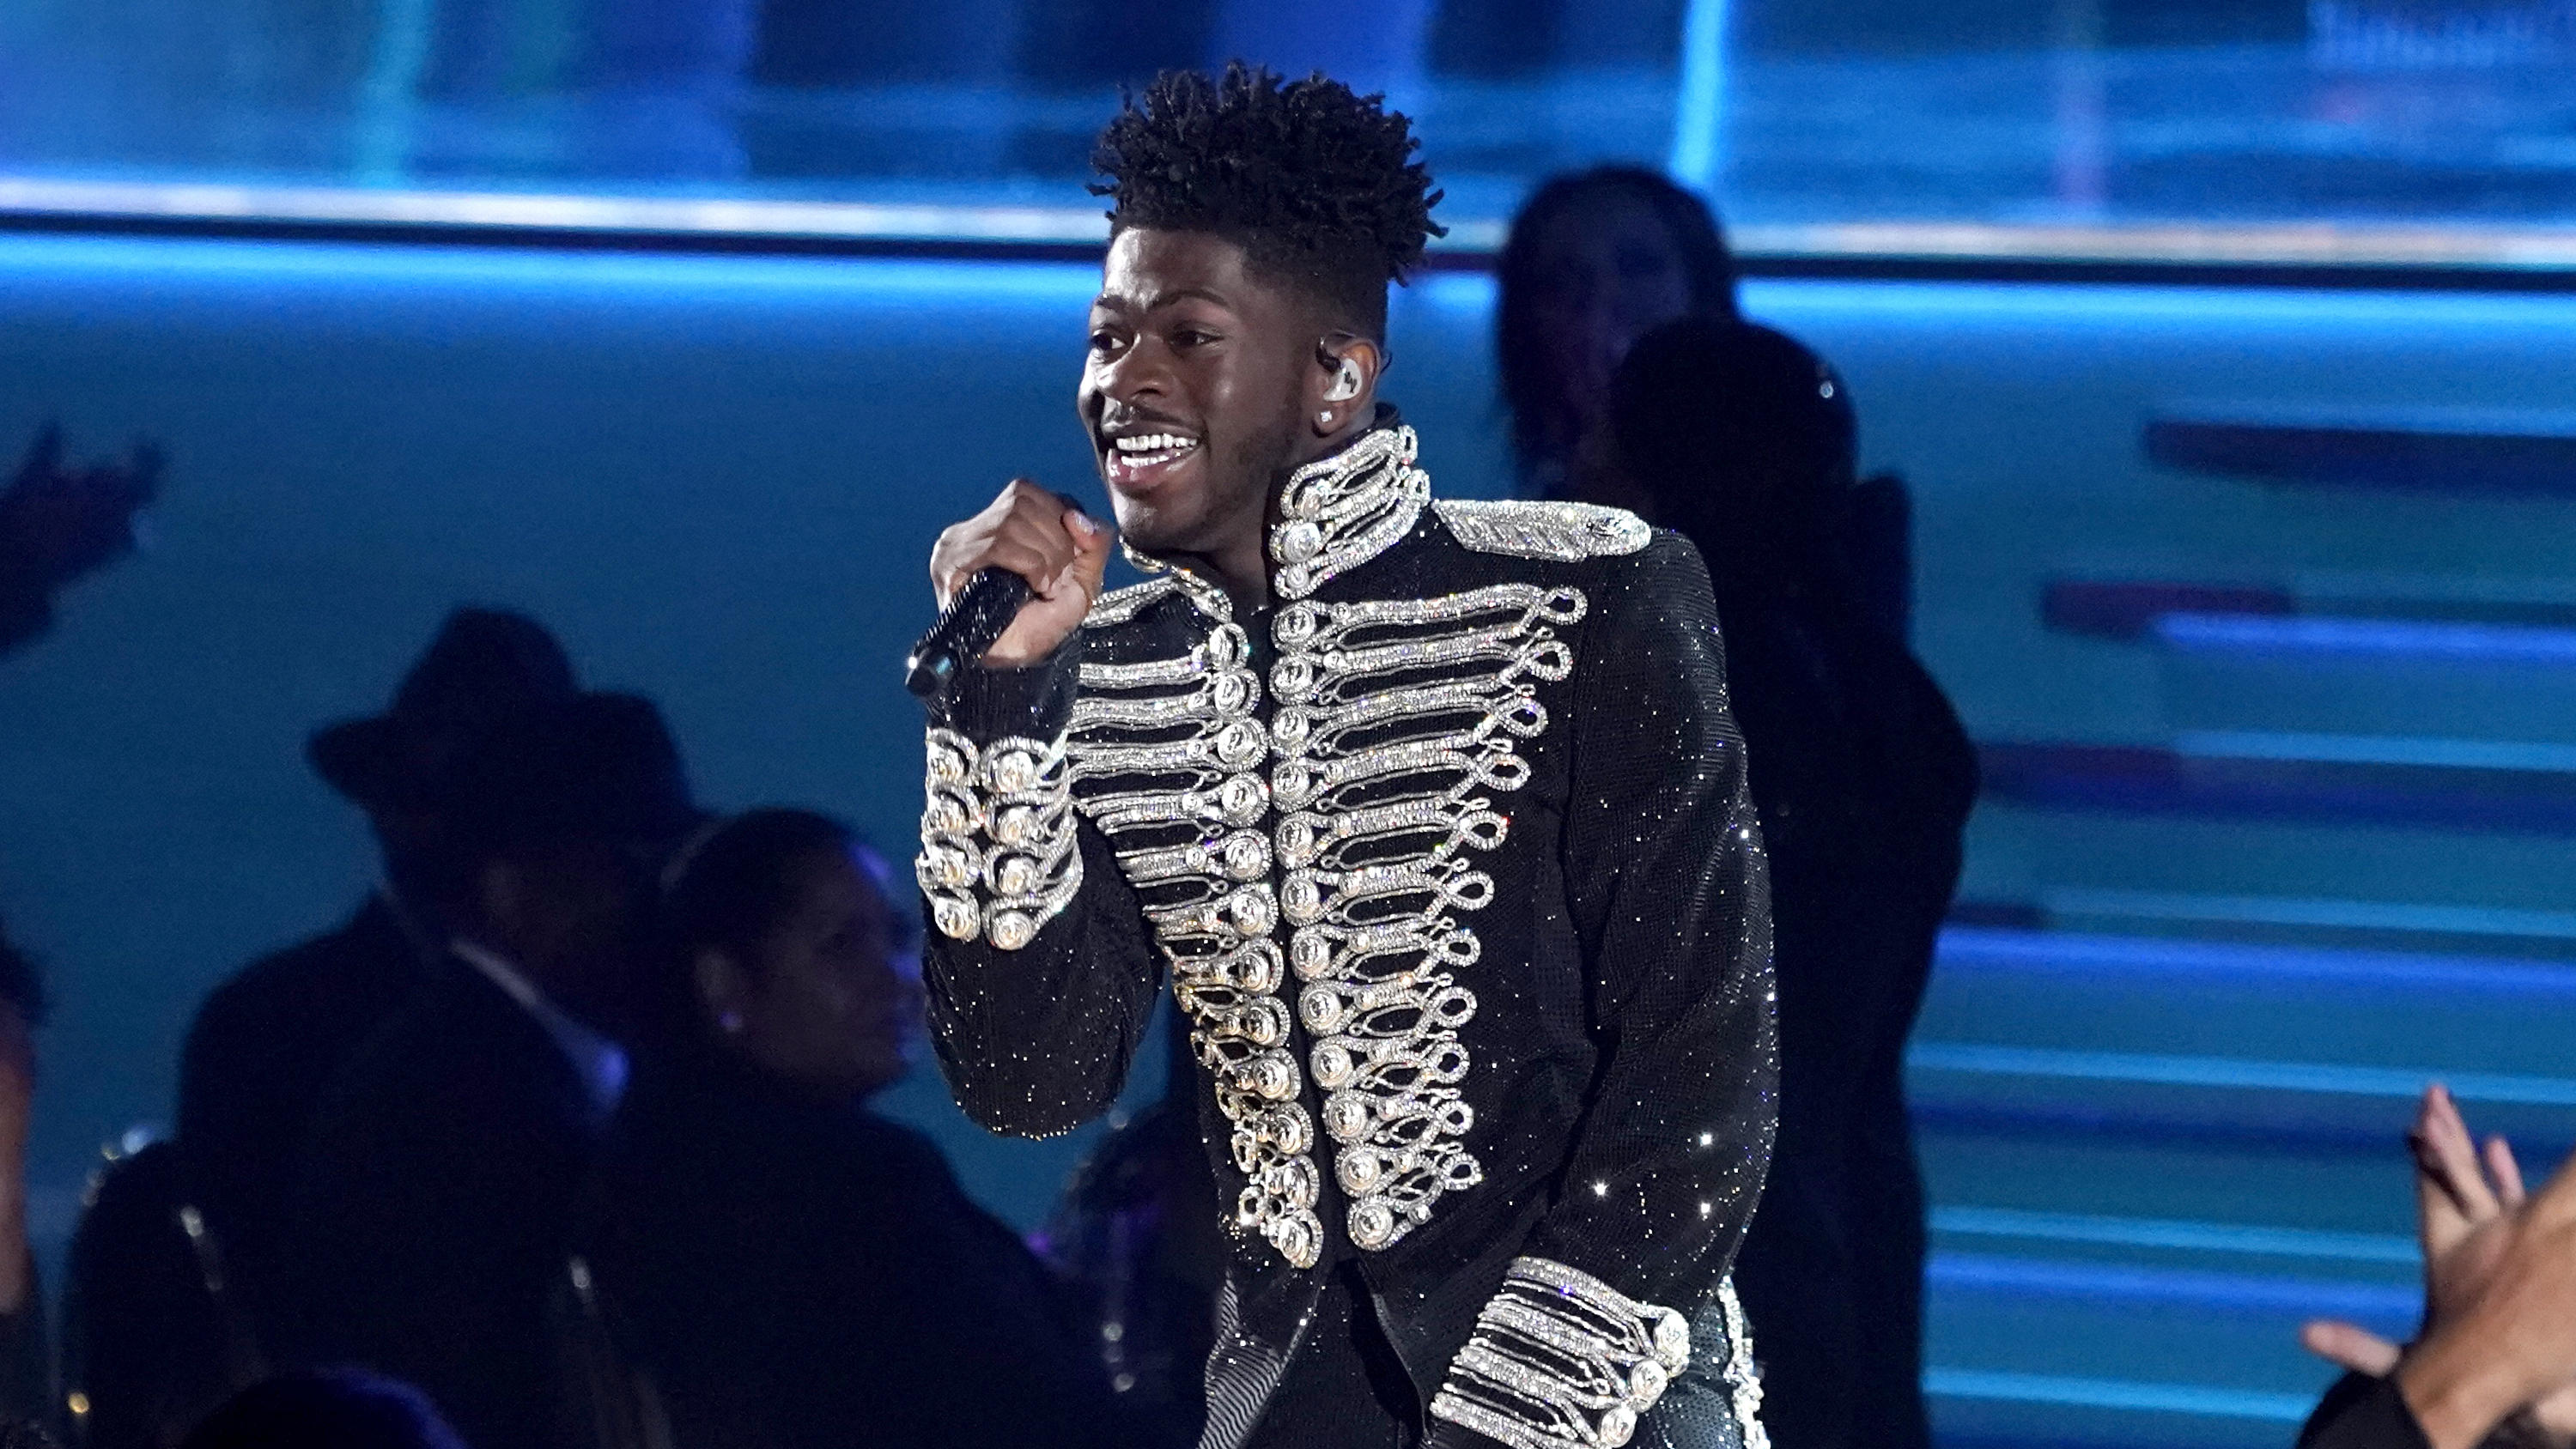 Lil Nas X performs a medley at the 64th Annual Grammy Awards on Sunday, April 3, 2022, in Las Vegas. (AP Photo/Chris Pizzello)